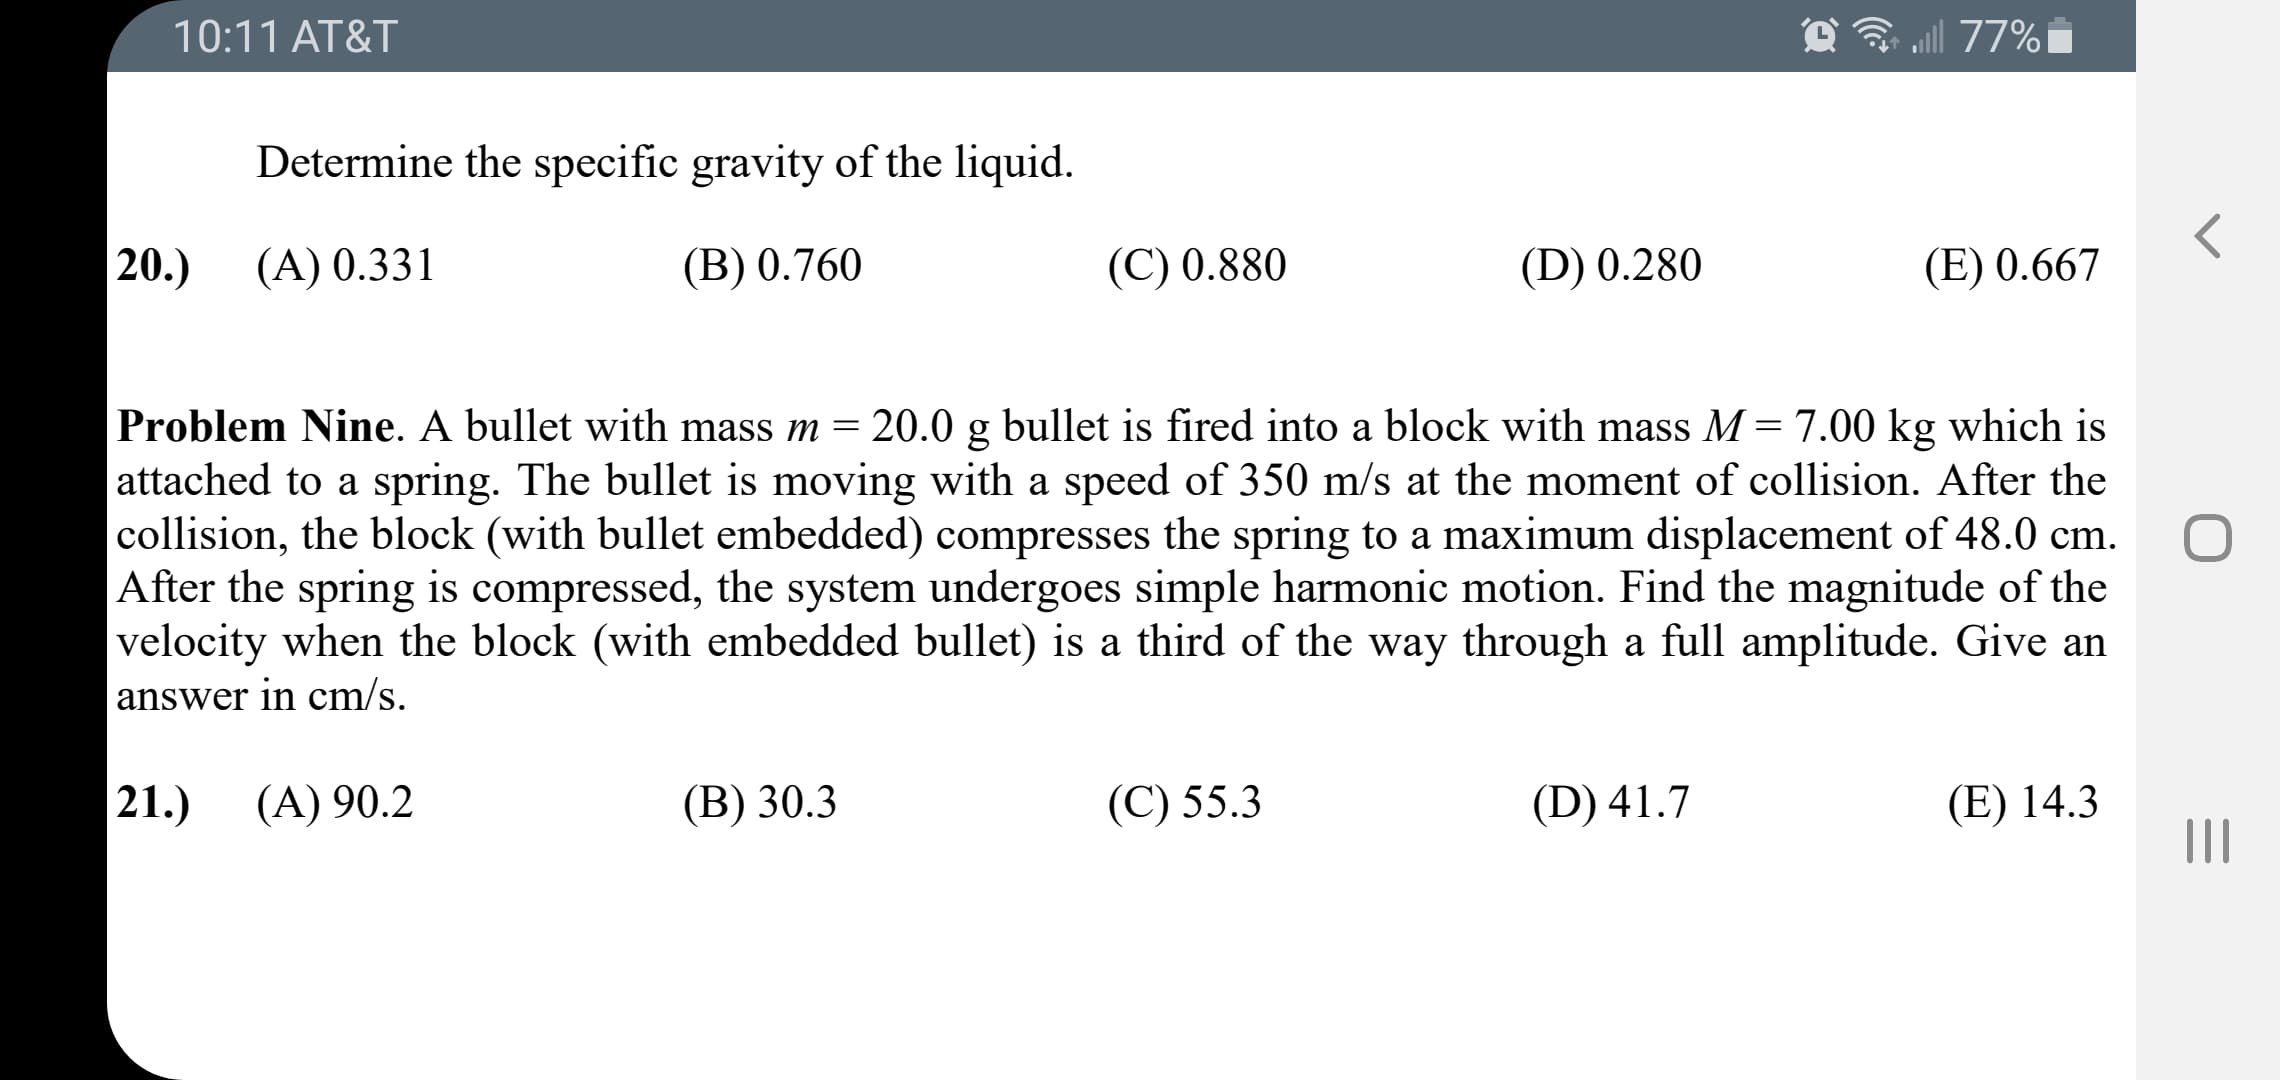 Problem Nine. A bullet with mass m = 20.0 g bullet is fired into a block with mass M=7.00 kg which is
attached to a spring. The bullet is moving with a speed of 350 m/s at the moment of collision. After the
collision, the block (with bullet embedded) compresses the spring to a maximum displacement of 48.0 cm.
After the spring is compressed, the system undergoes simple harmonic motion. Find the magnitude of the
velocity when the block (with embedded bullet) is a third of the way through a full amplitude. Give an
answer in cm/s.
